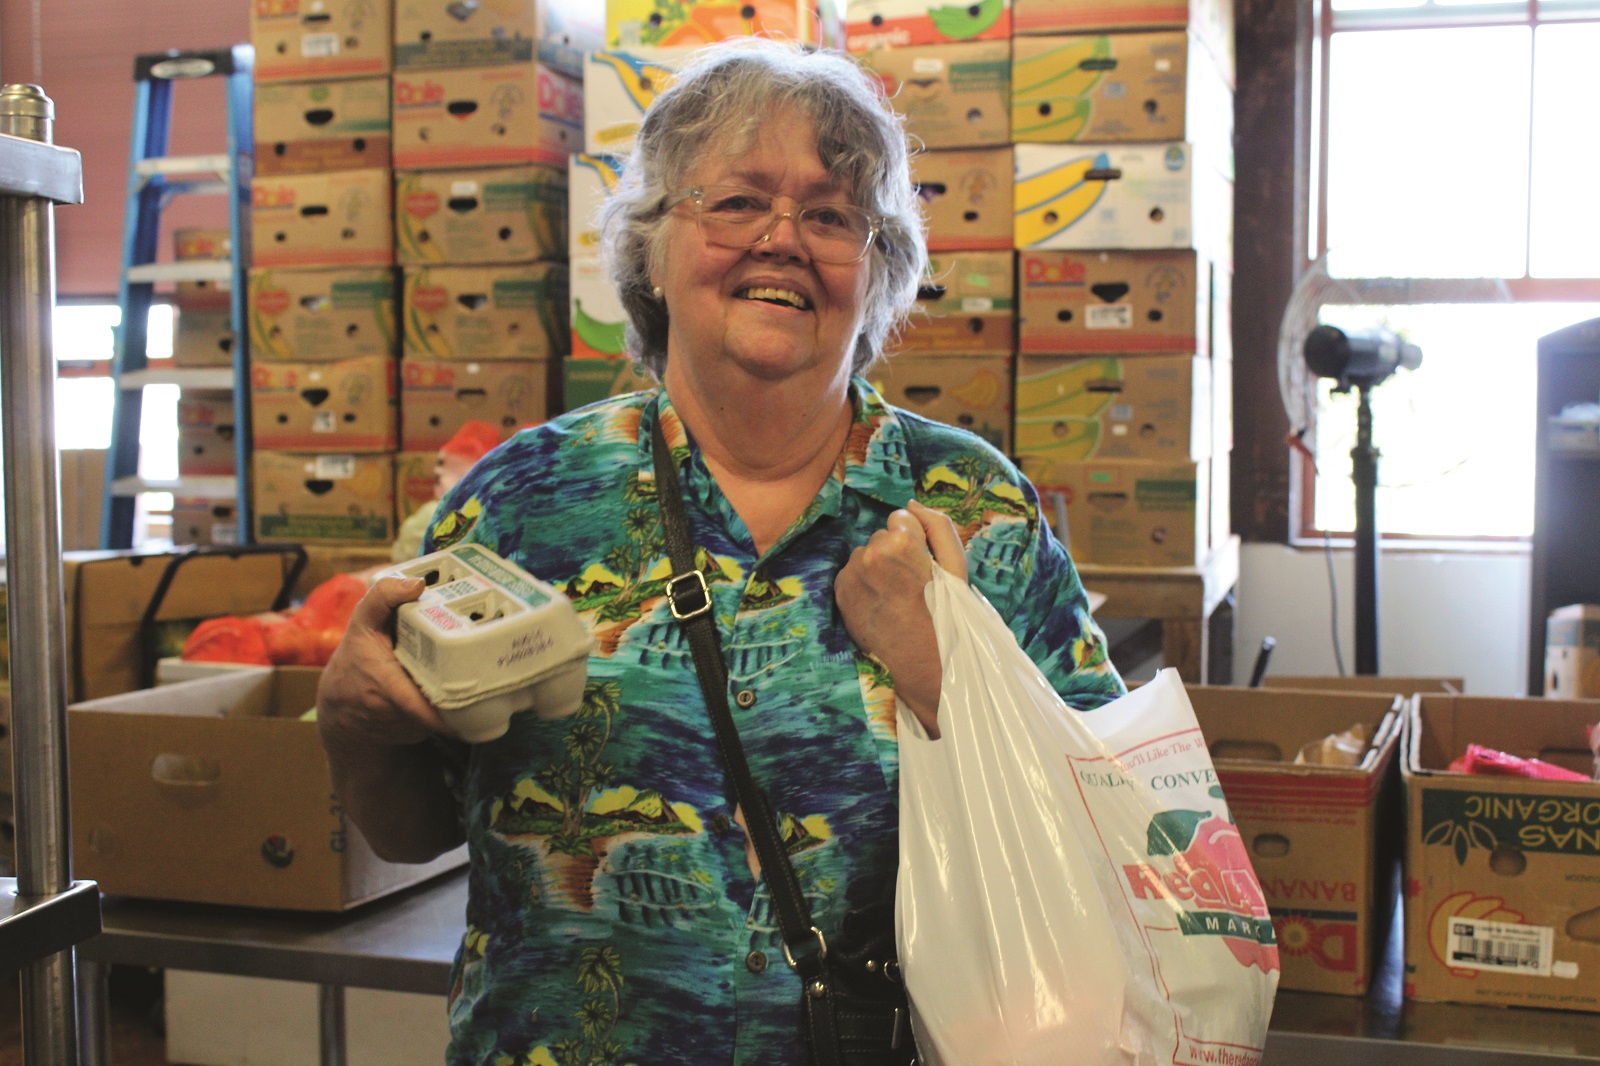 Smiling woman looks into the camera holding eggs and groceries from the food bank.